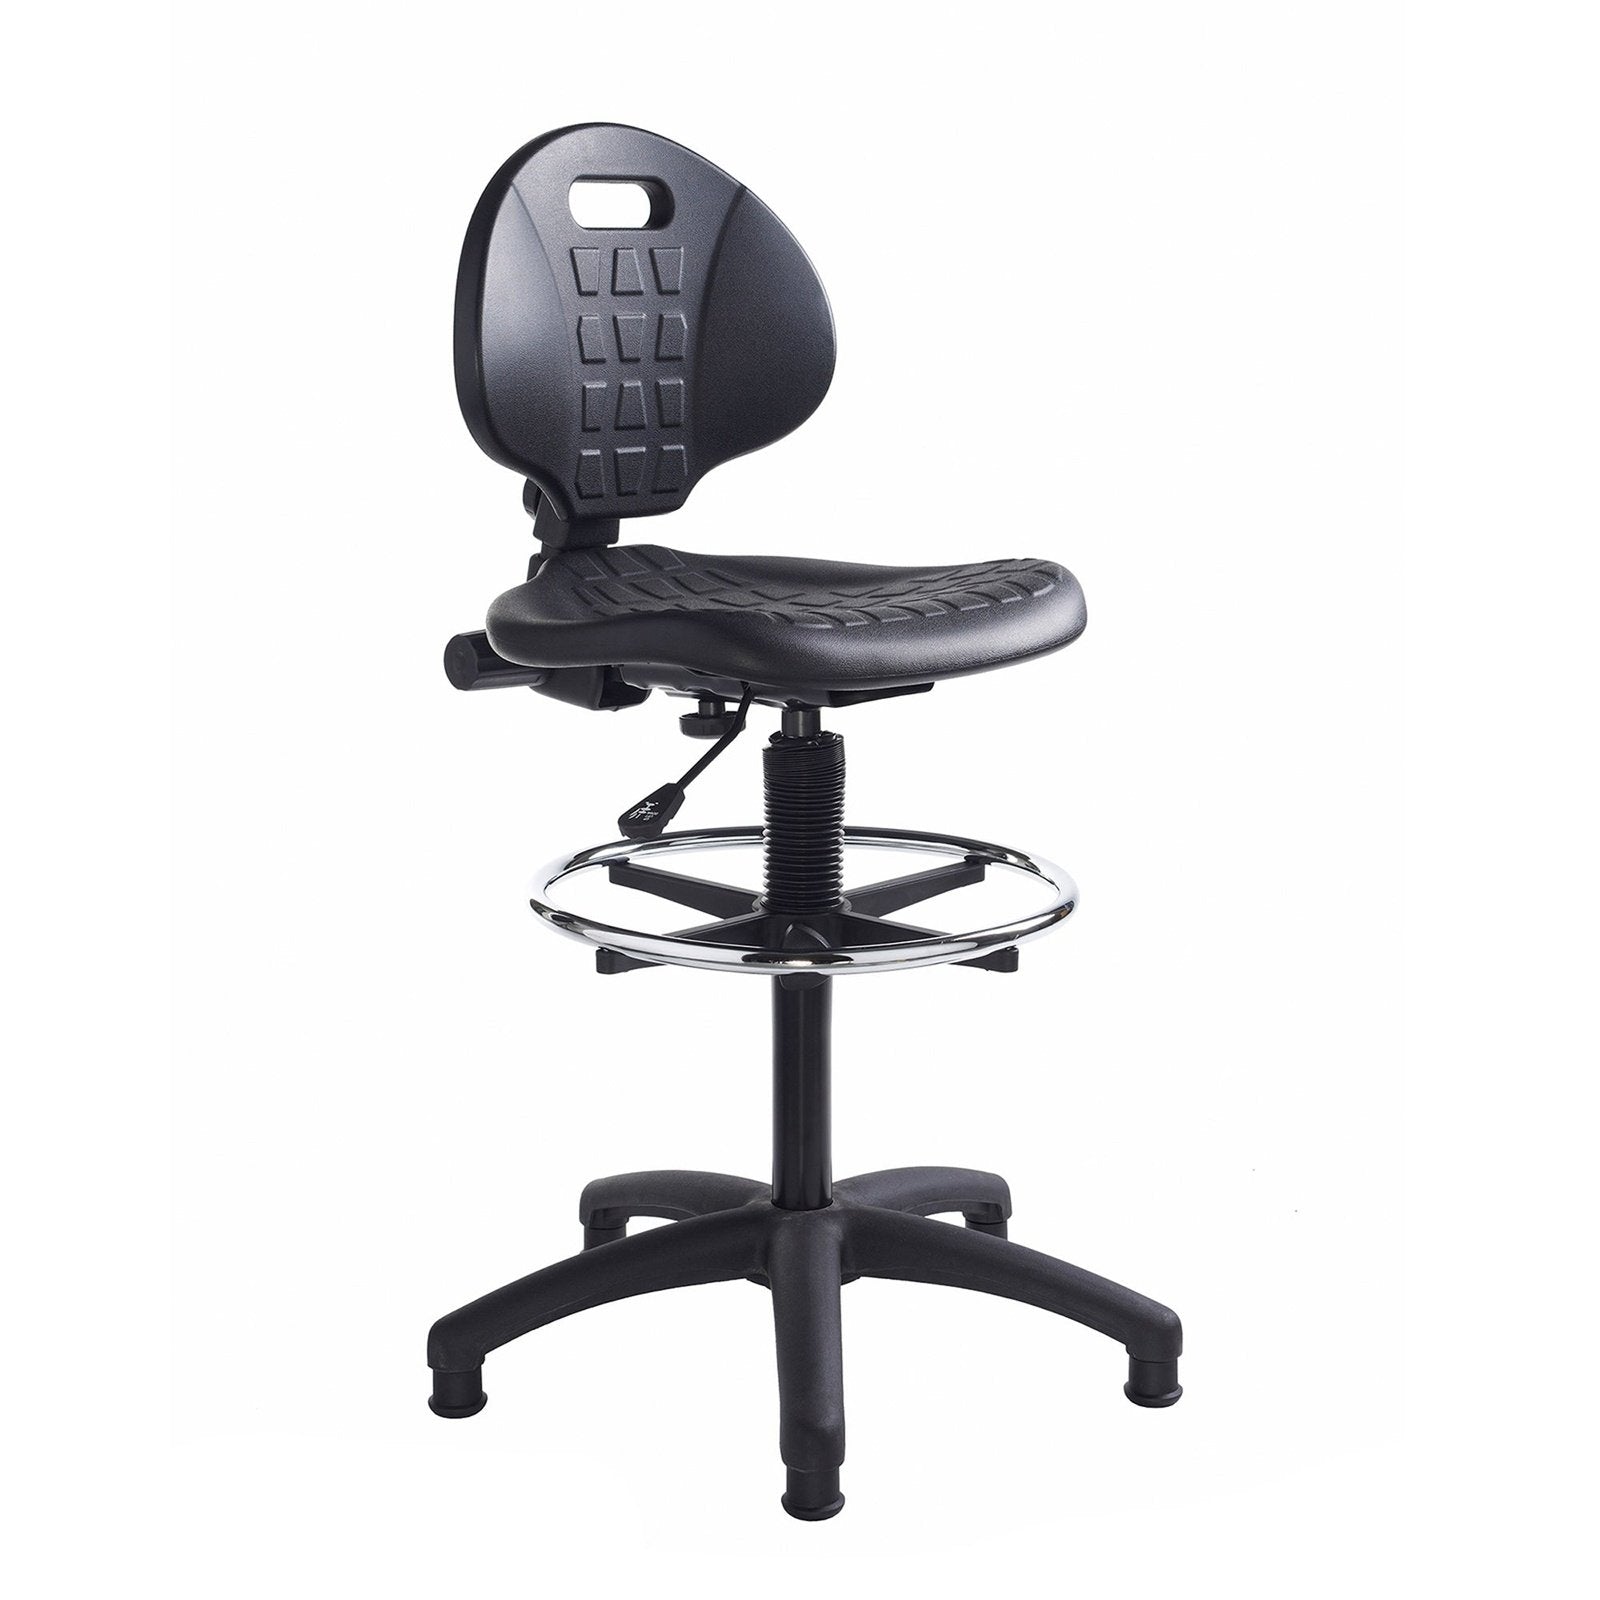 Prema polyurethane industrial operator chair with contoured back support - black - Office Products Online